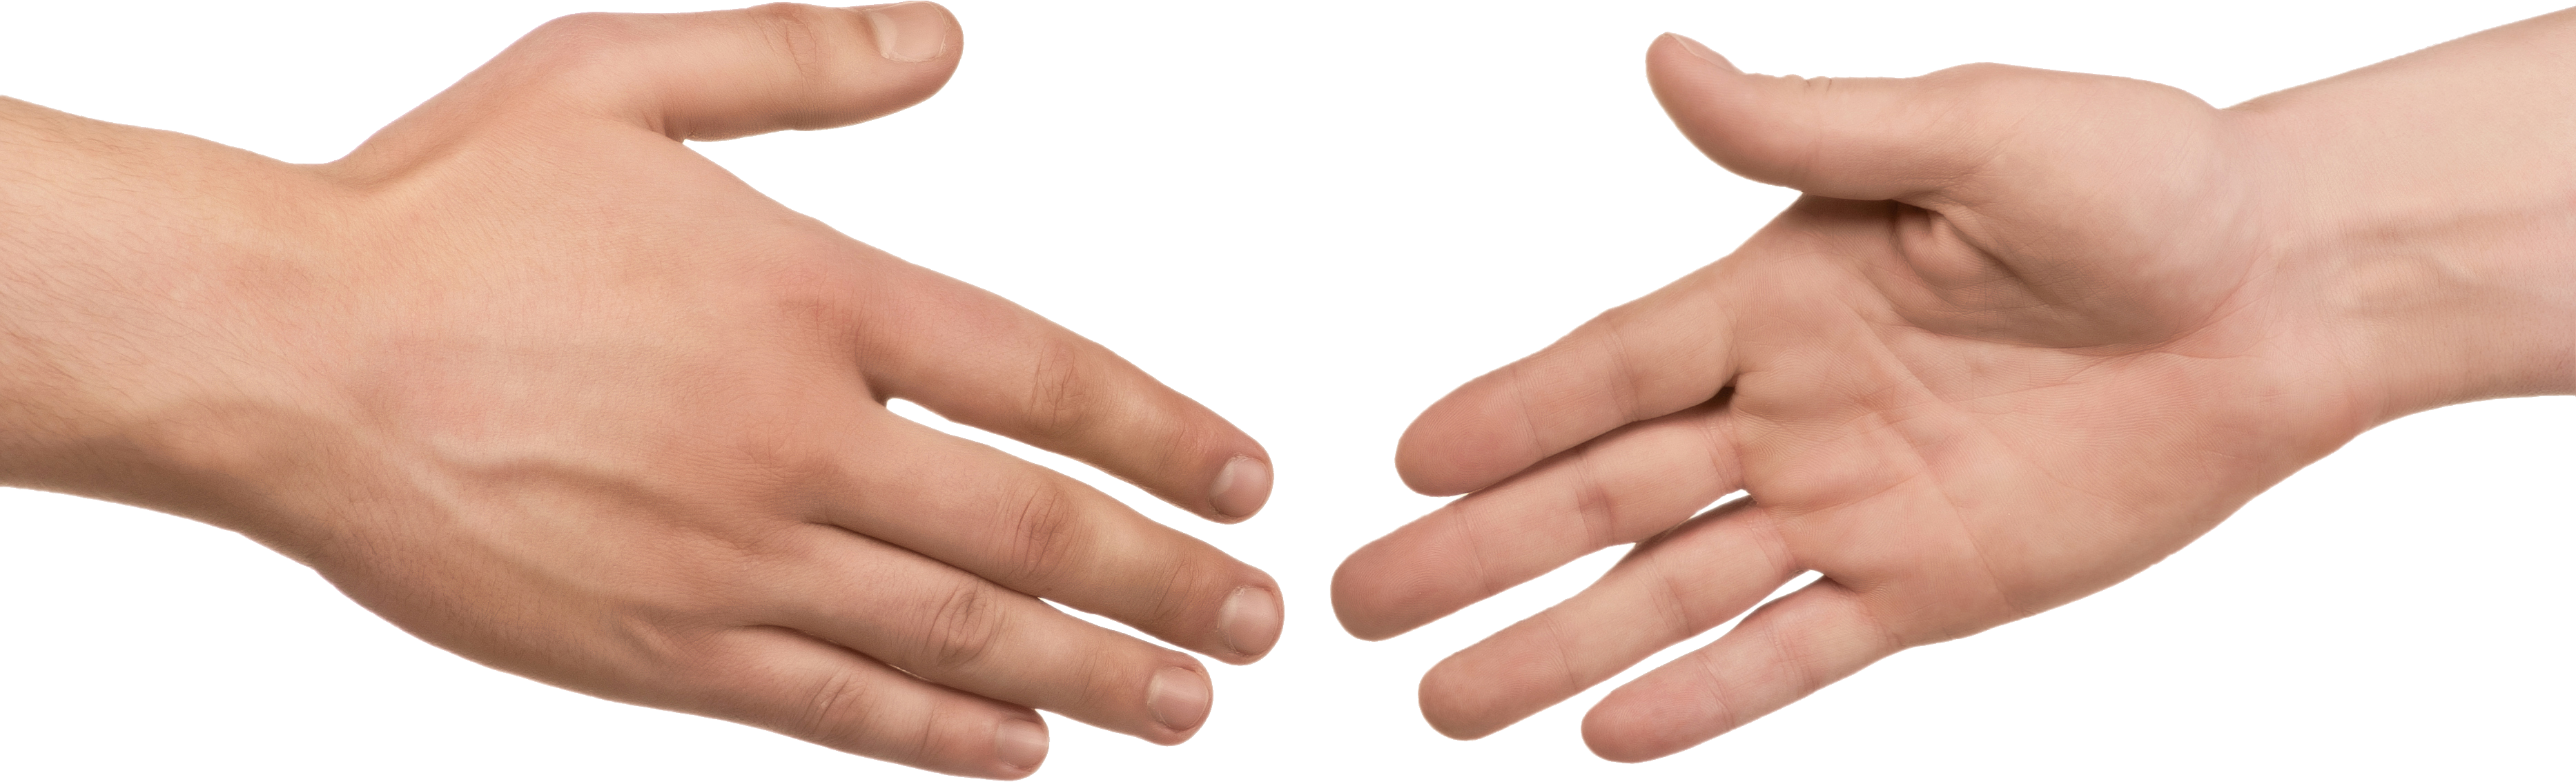 Png hd transparent images. Handshake clipart two hand